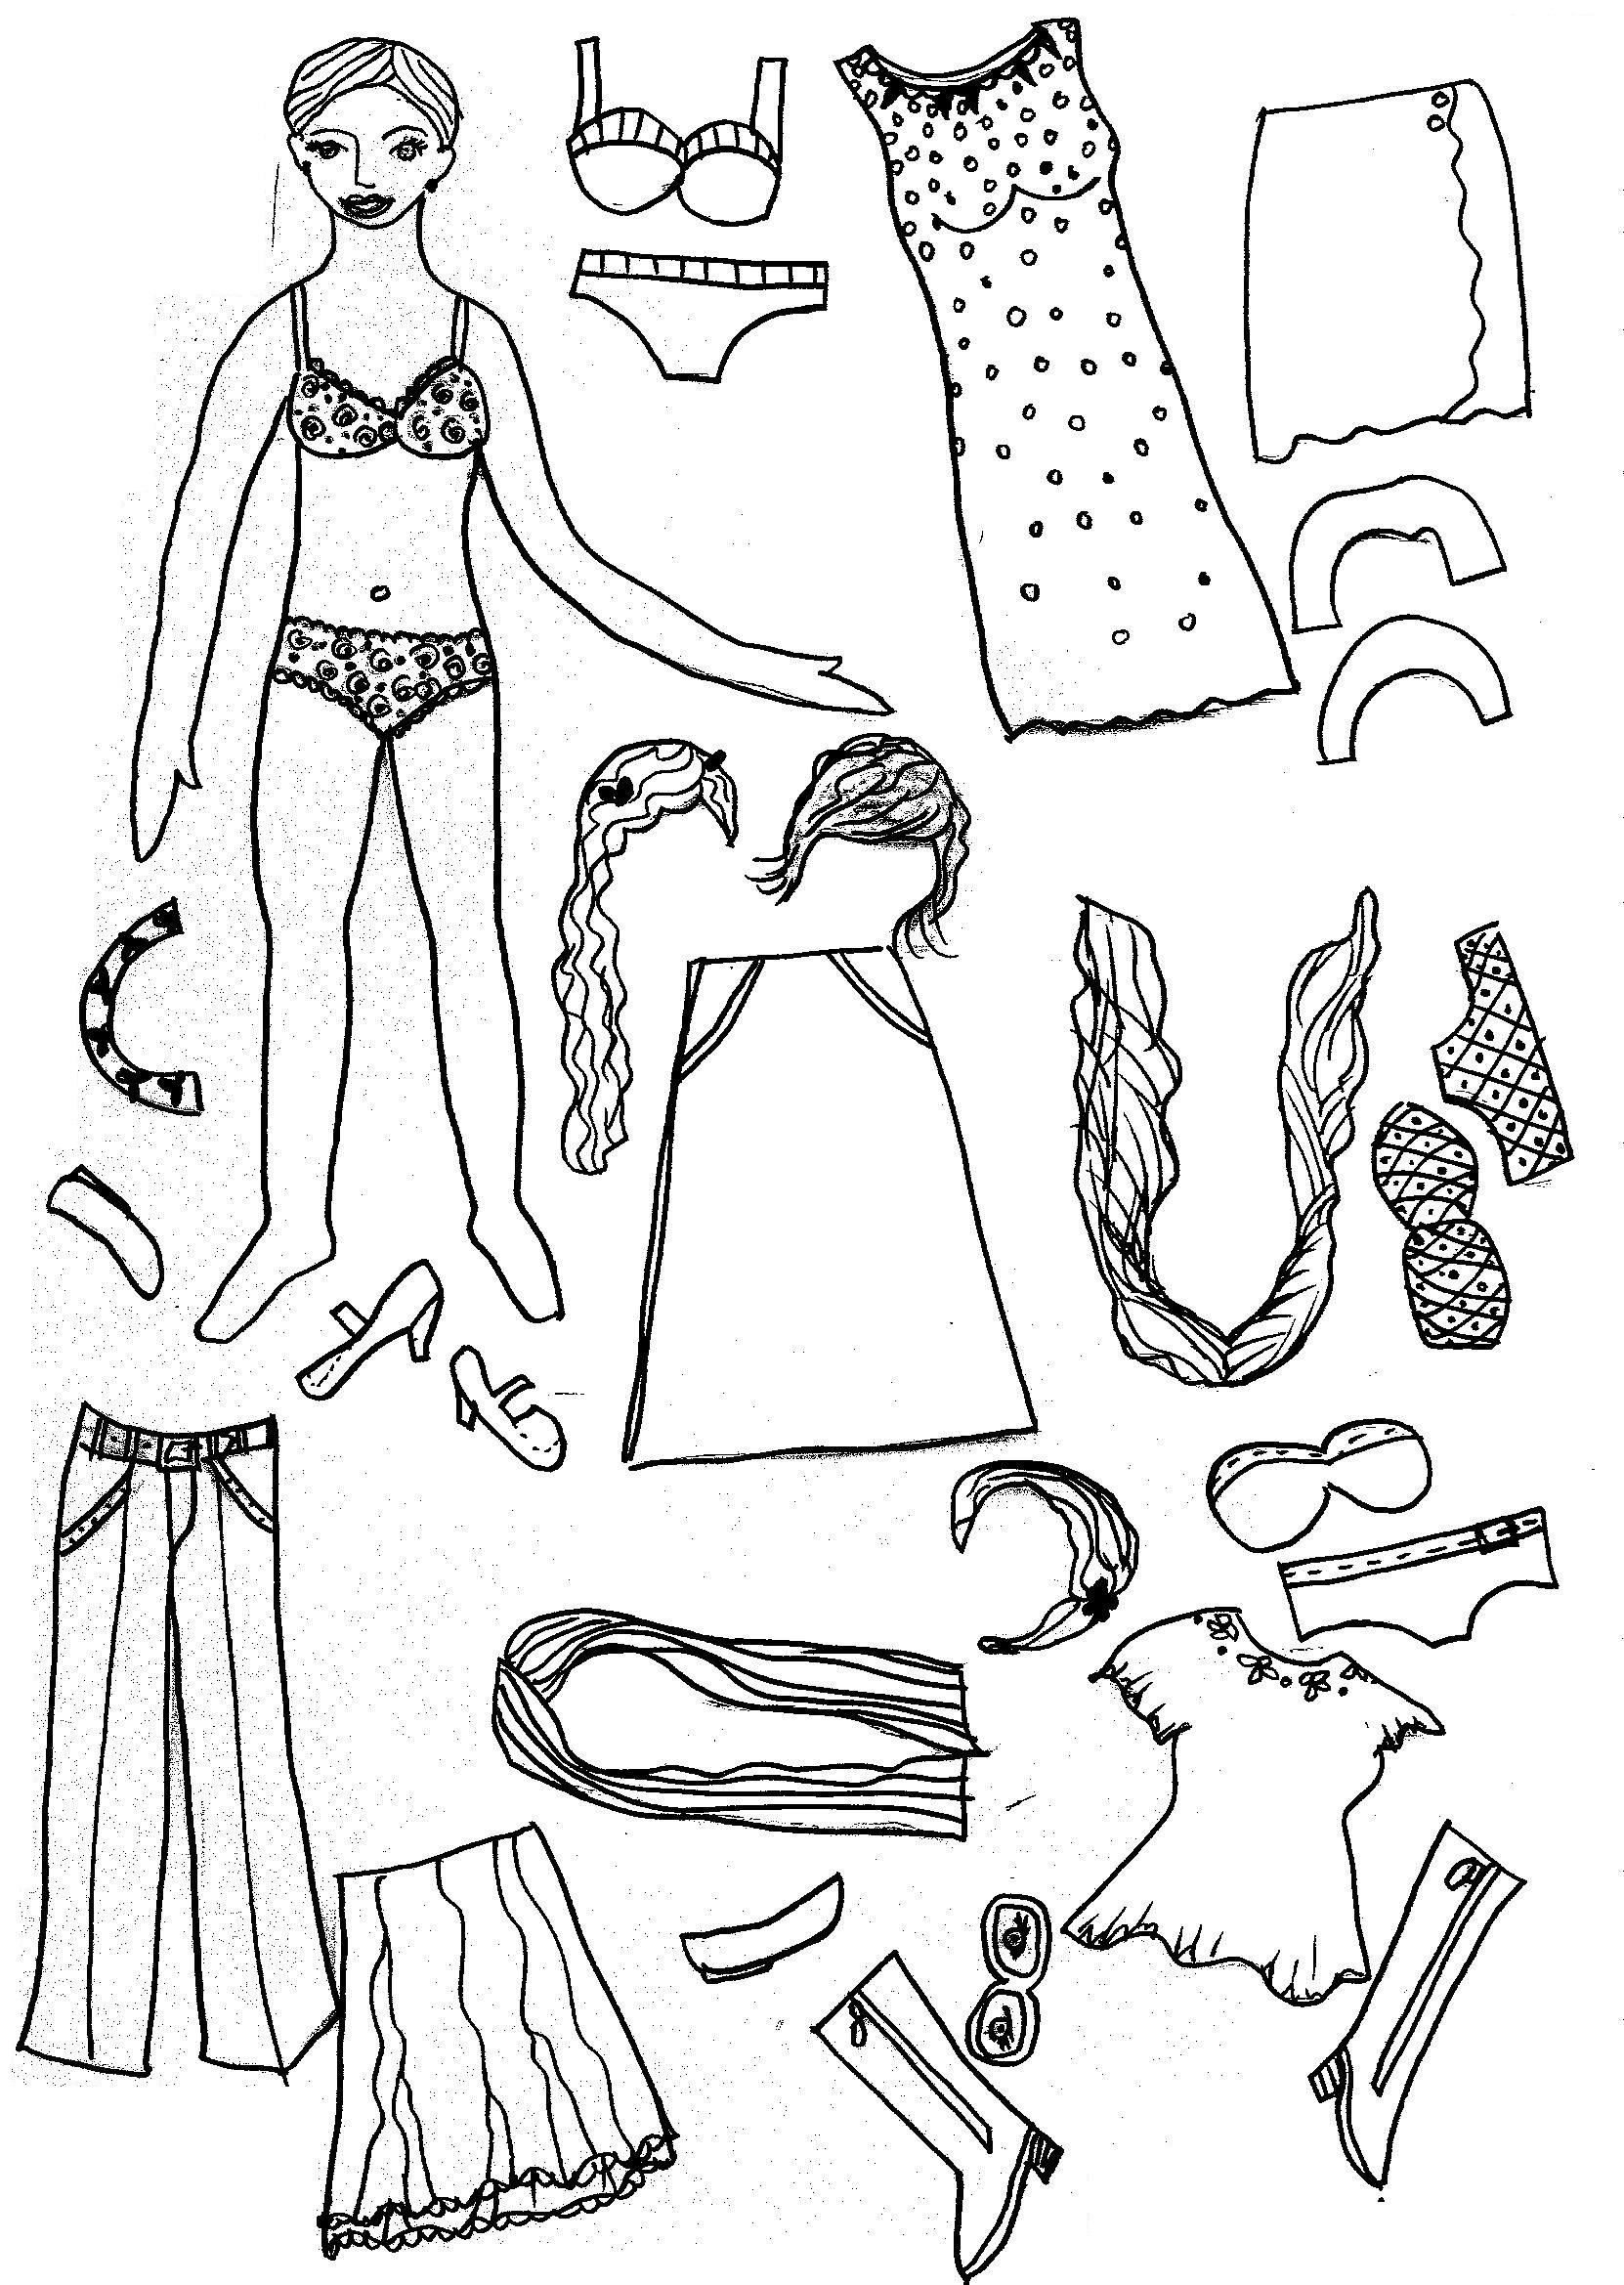 Free Printable Paper Doll Coloring Pages For Kids Pertaining To - Free Printable Paper Doll Coloring Pages